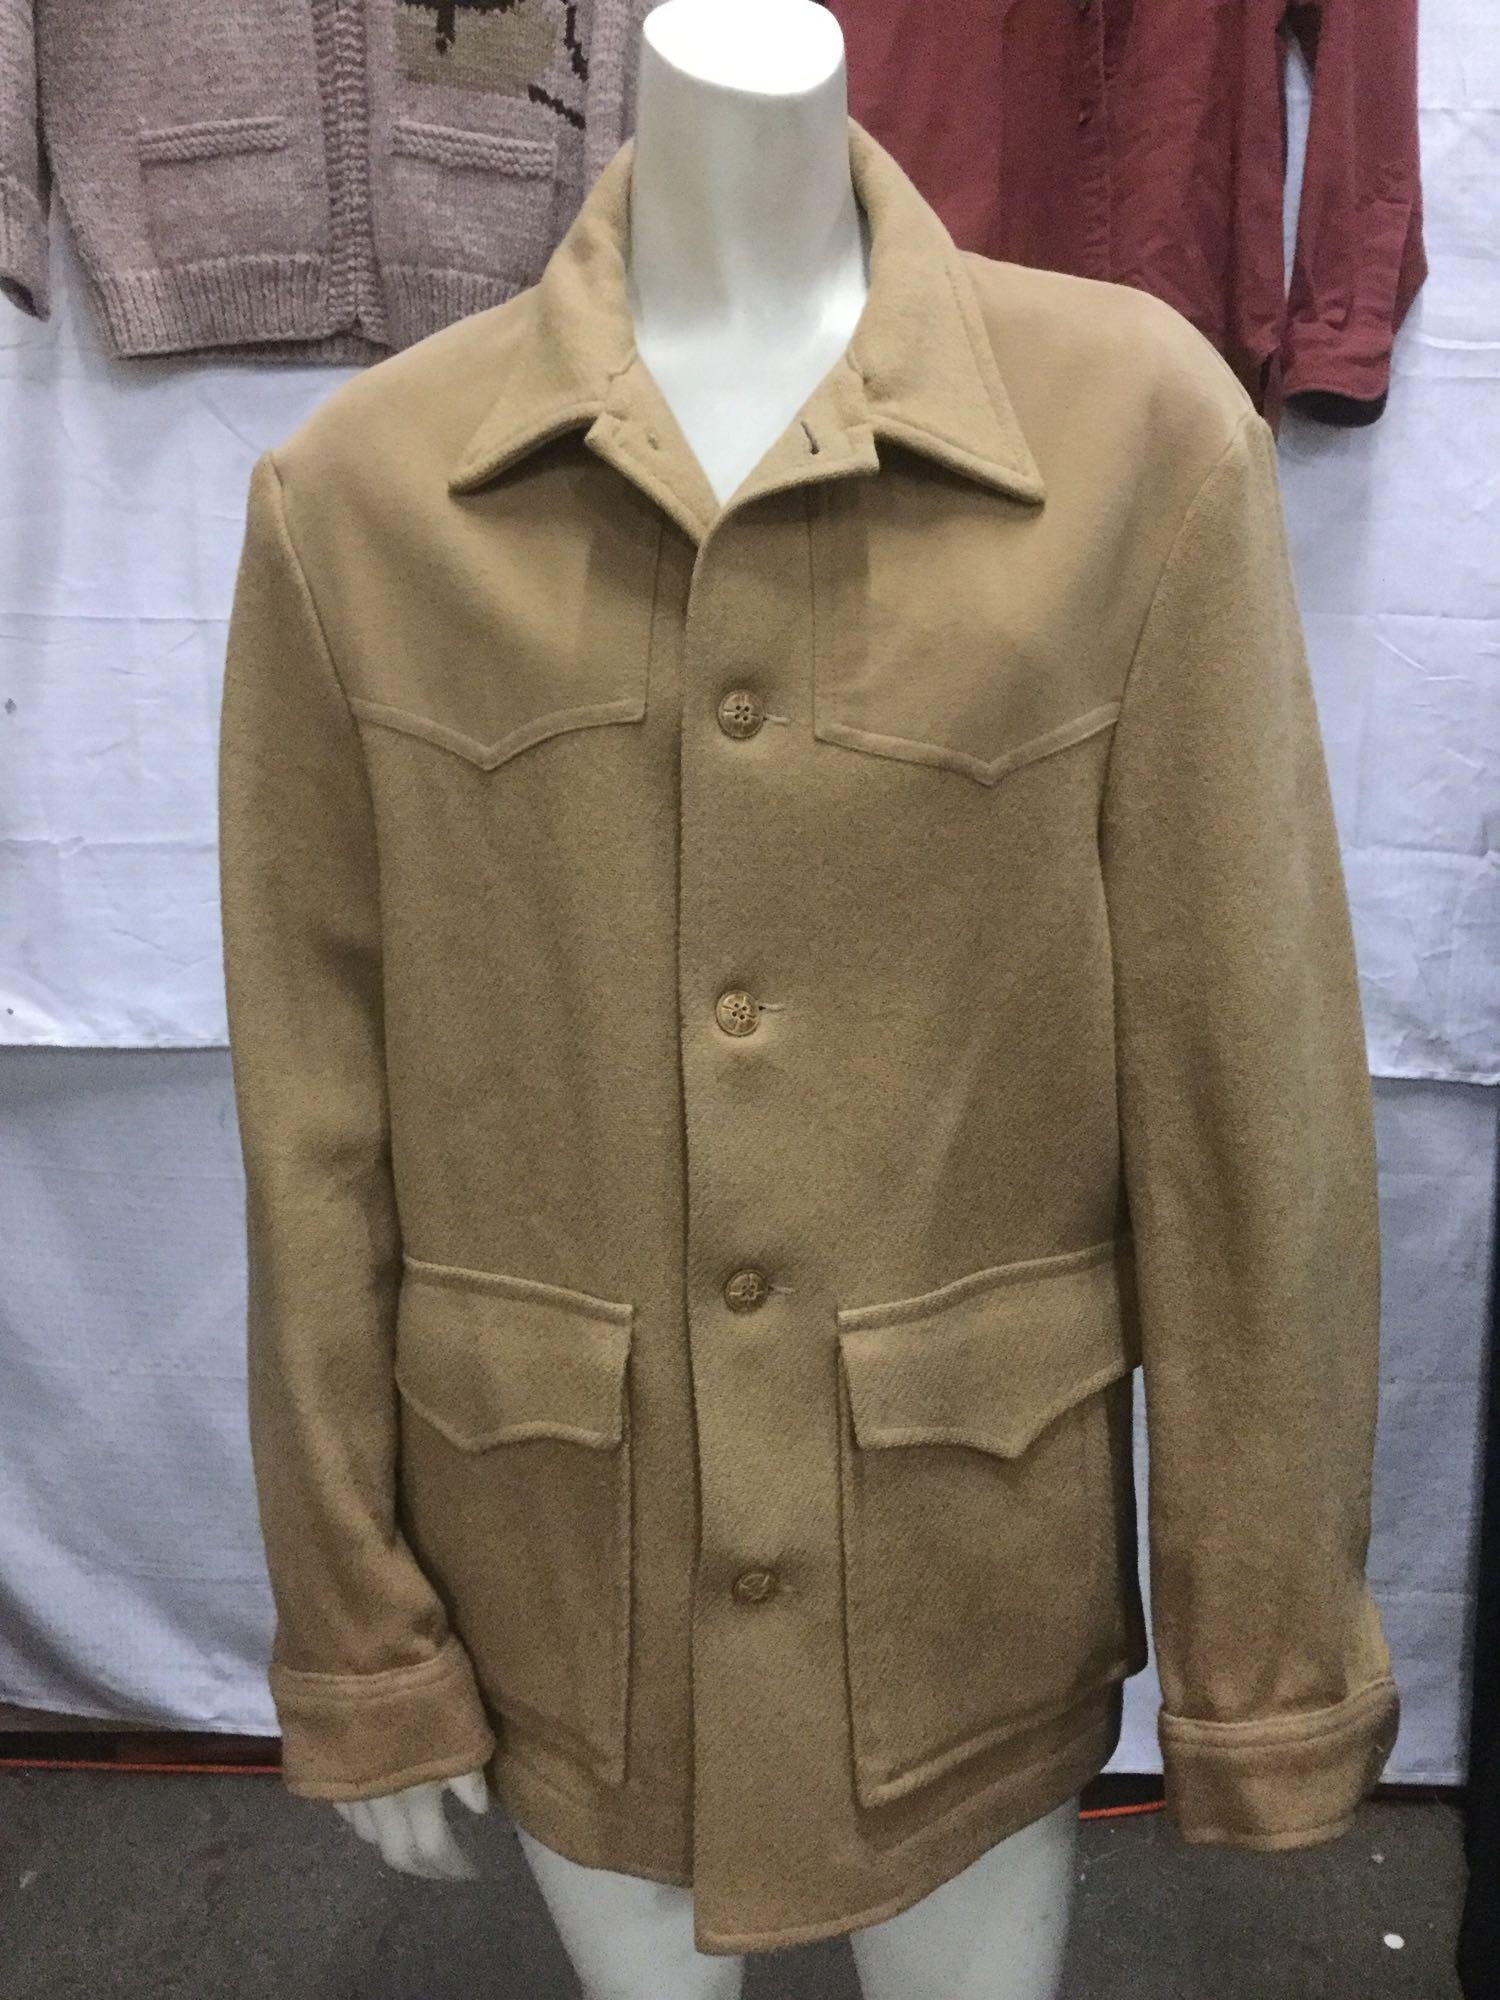 6 vintage high end wool garments - James Pringle, Donegal from Ireland, LL Bean, Woolrich, See pics